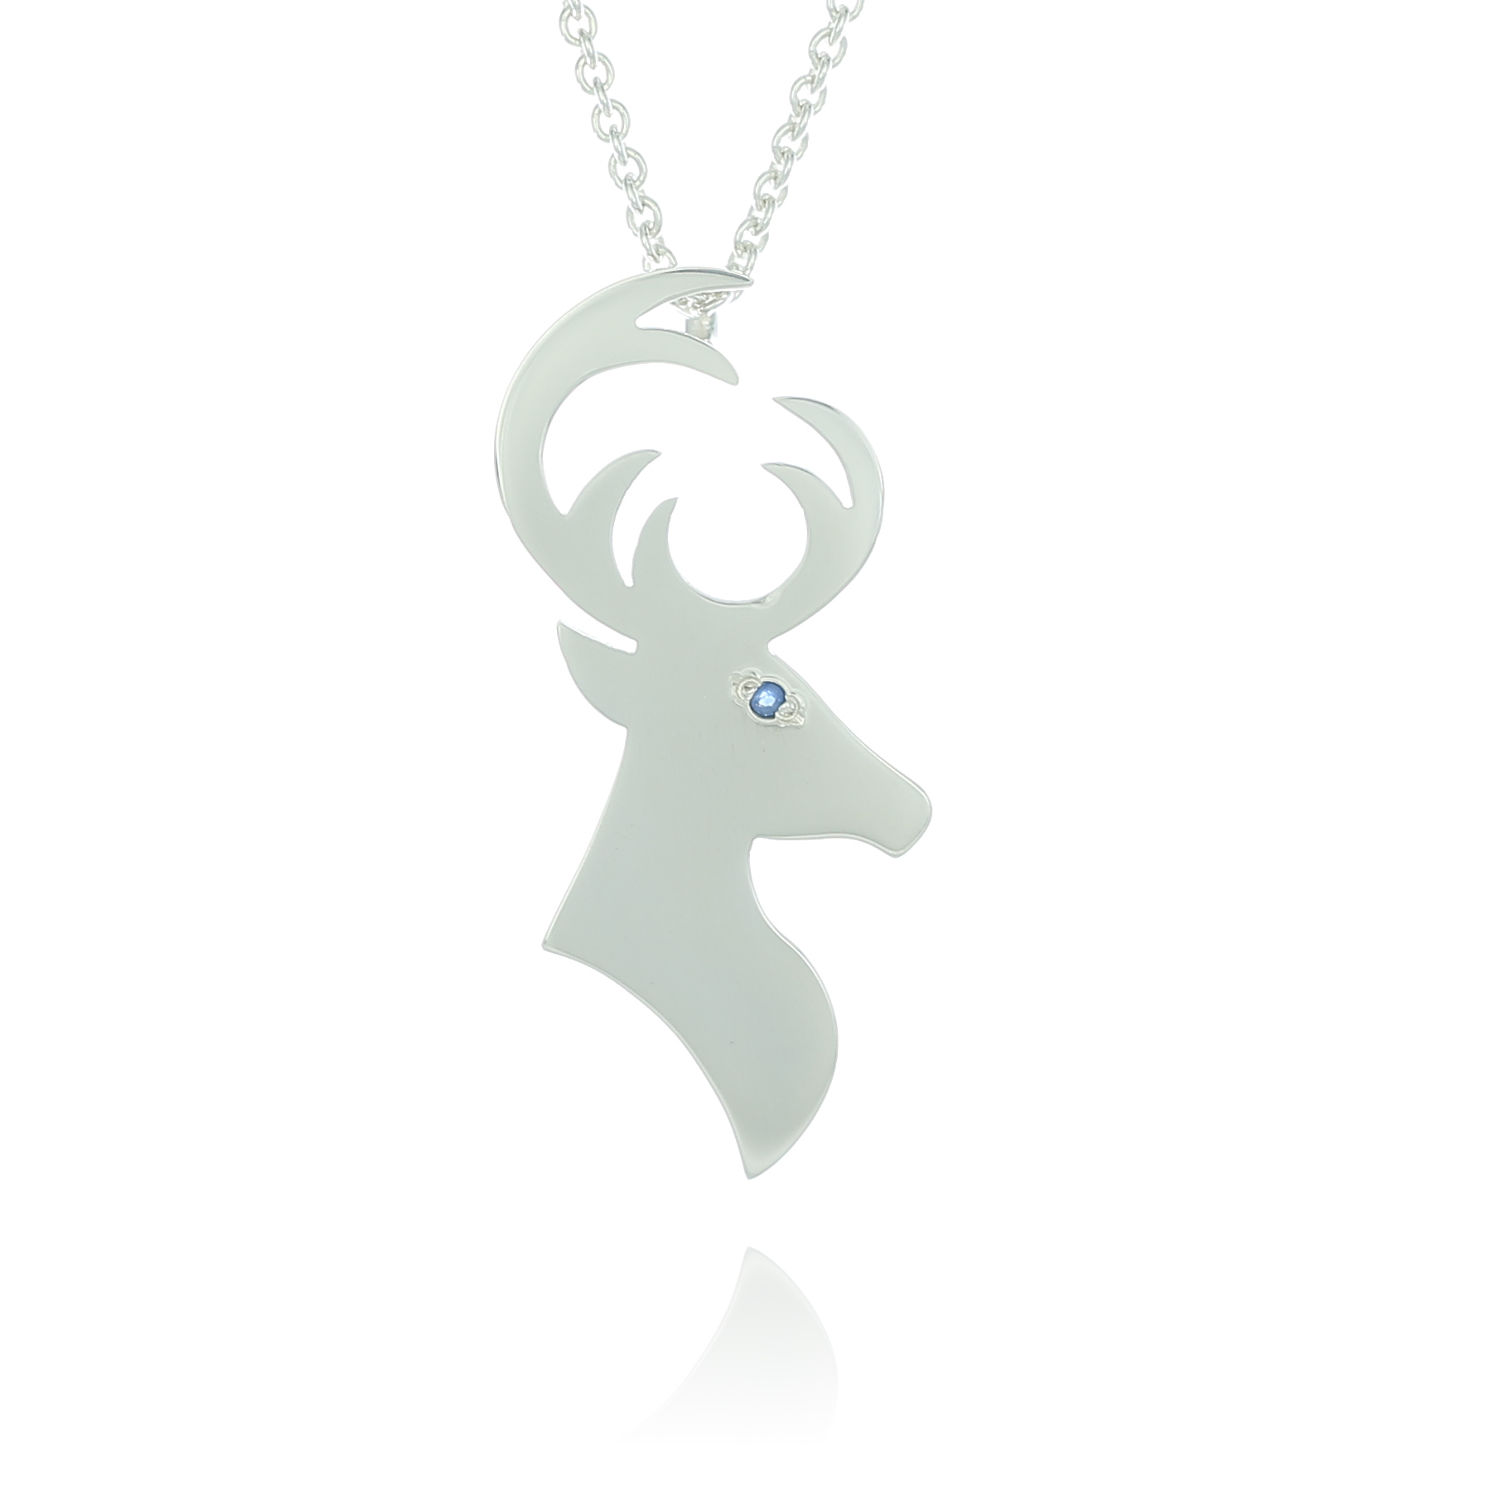 Stag Pendant Necklace, Polished